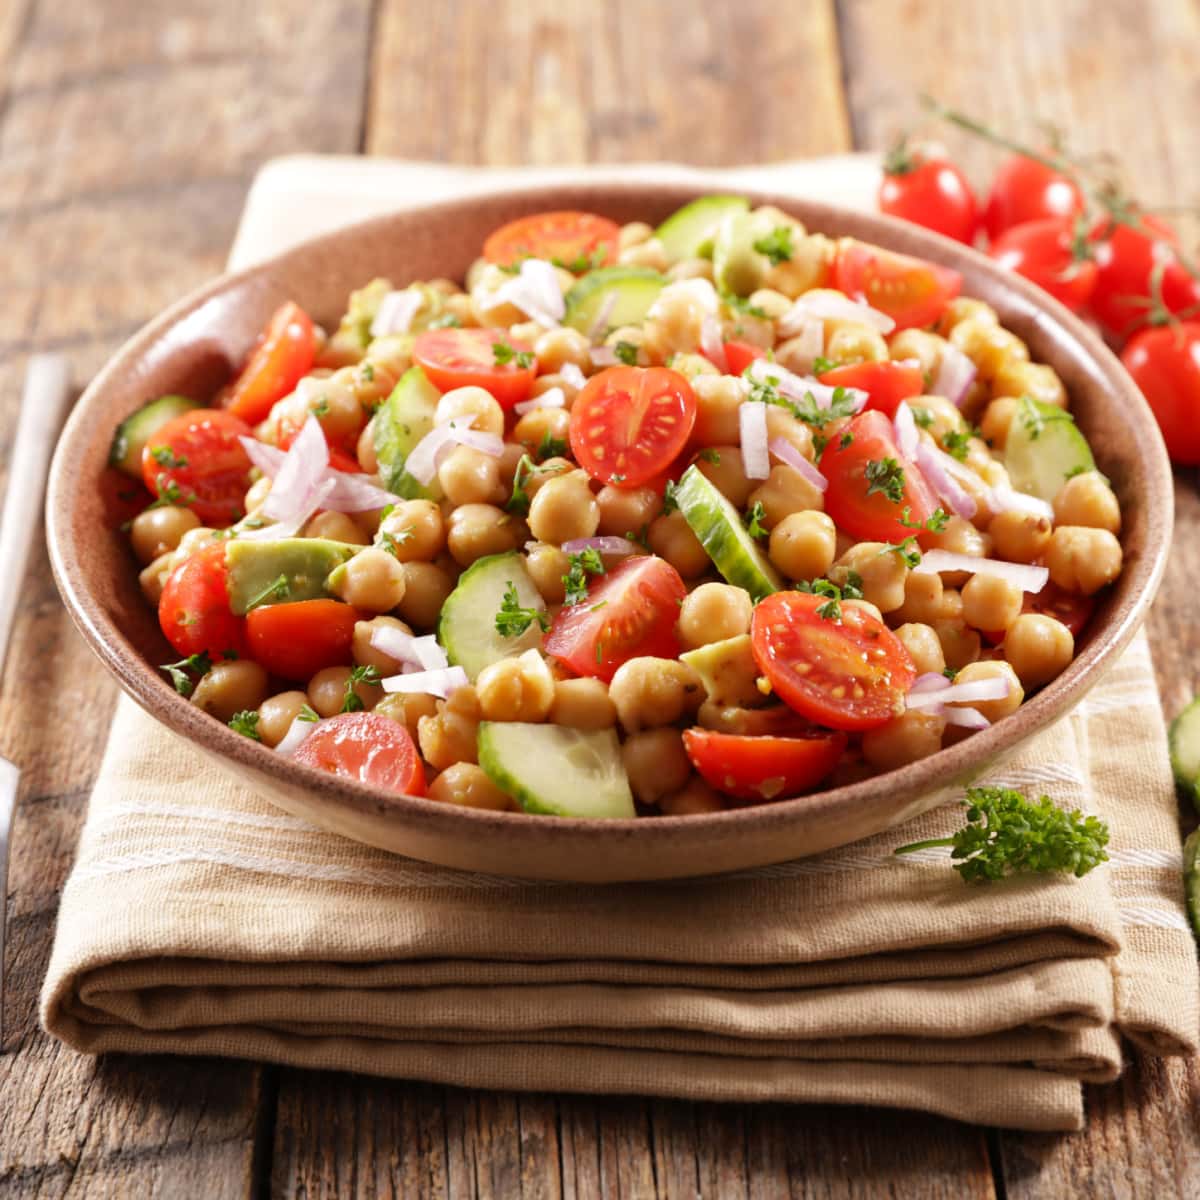 Chickpea salad in a wooden bowl with  chickpeas, juicy tomatoes, crunchy cucumbers, creamy avocado. 